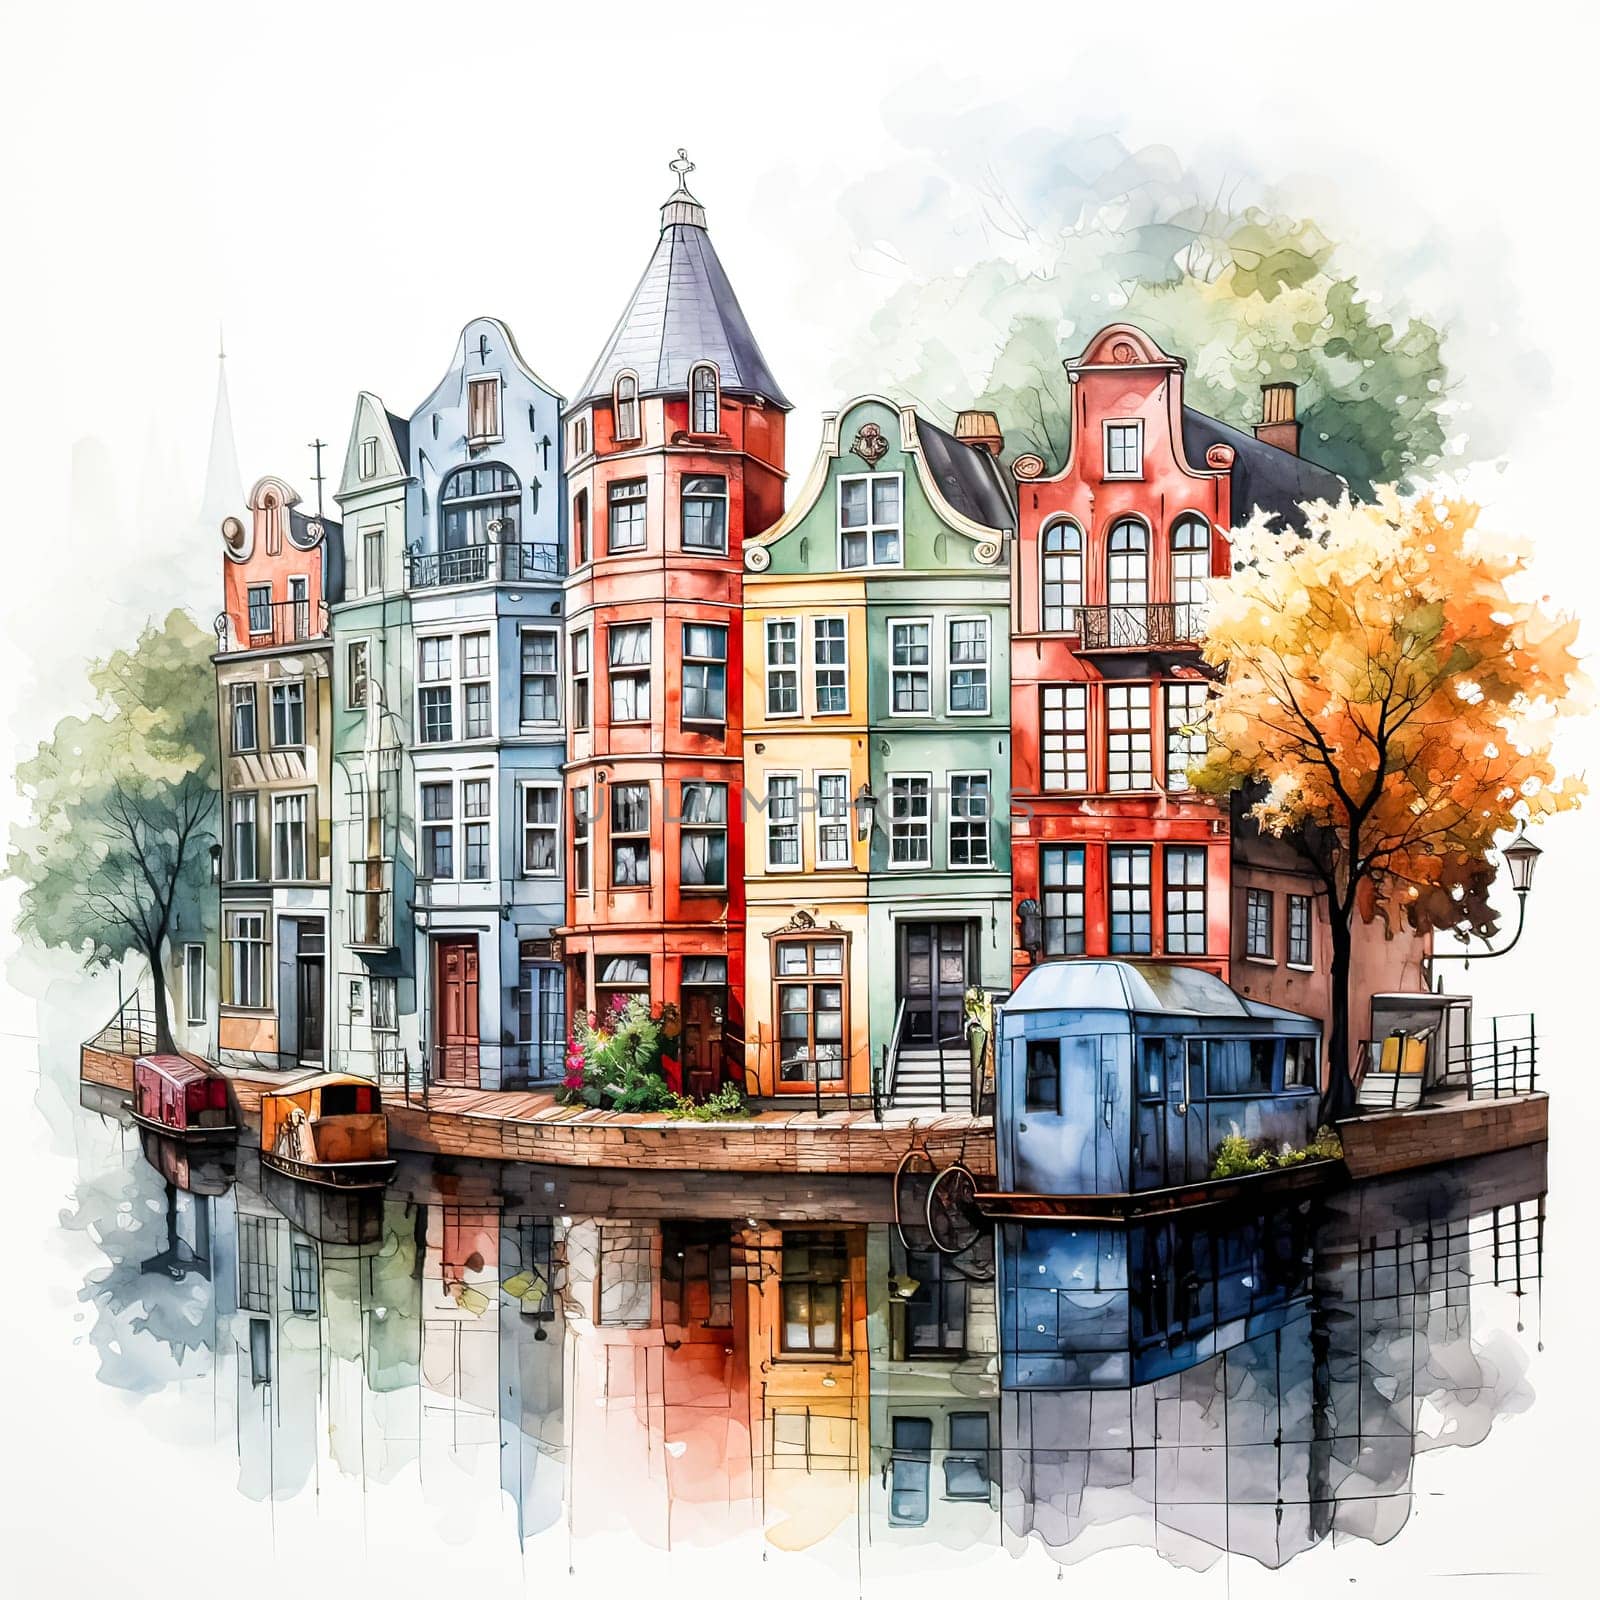 Amsterdams Charm, A watercolor sketch paints a vivid landscape with the iconic colorful houses against a natural backdrop